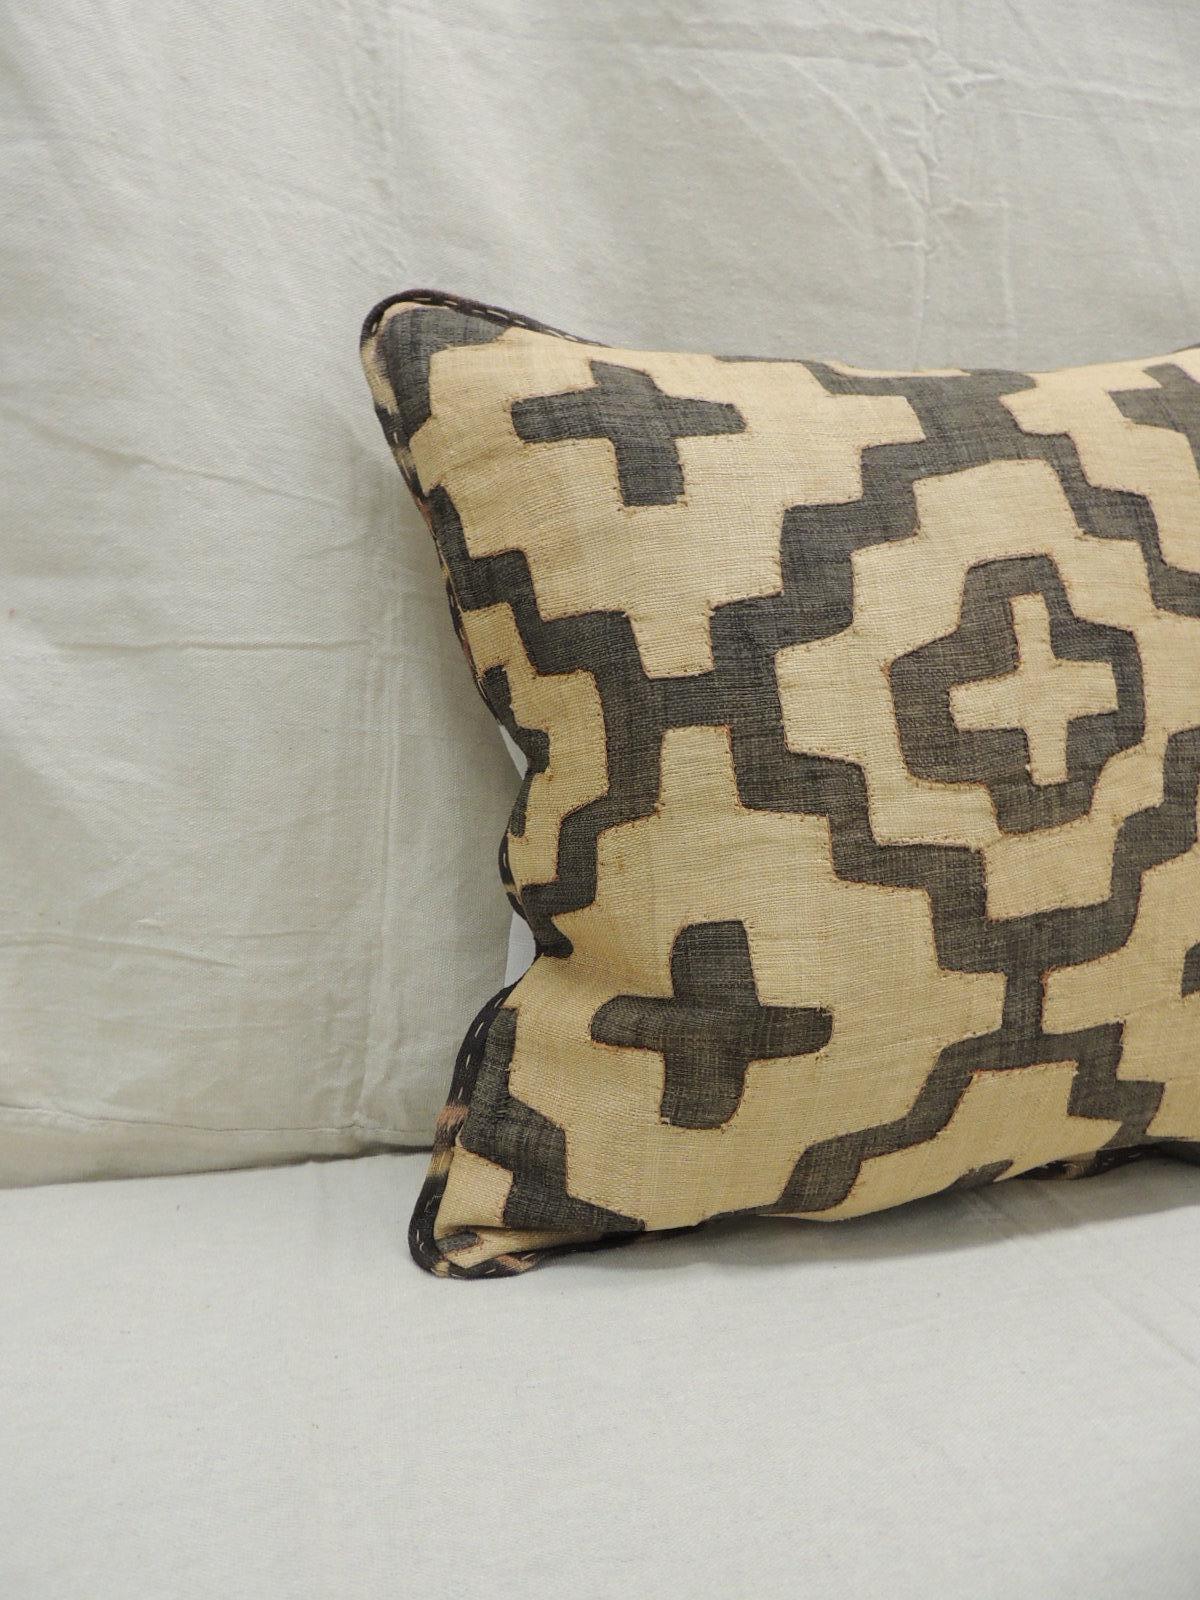 Vintage KUBA tan and black handwoven patchwork African decorative pillow.
Handwoven patchwork and appliqué raffia African decorative lumbar pillow with labyrinth pattern.
We used the original textile frame as a trim all around the pillow. Light